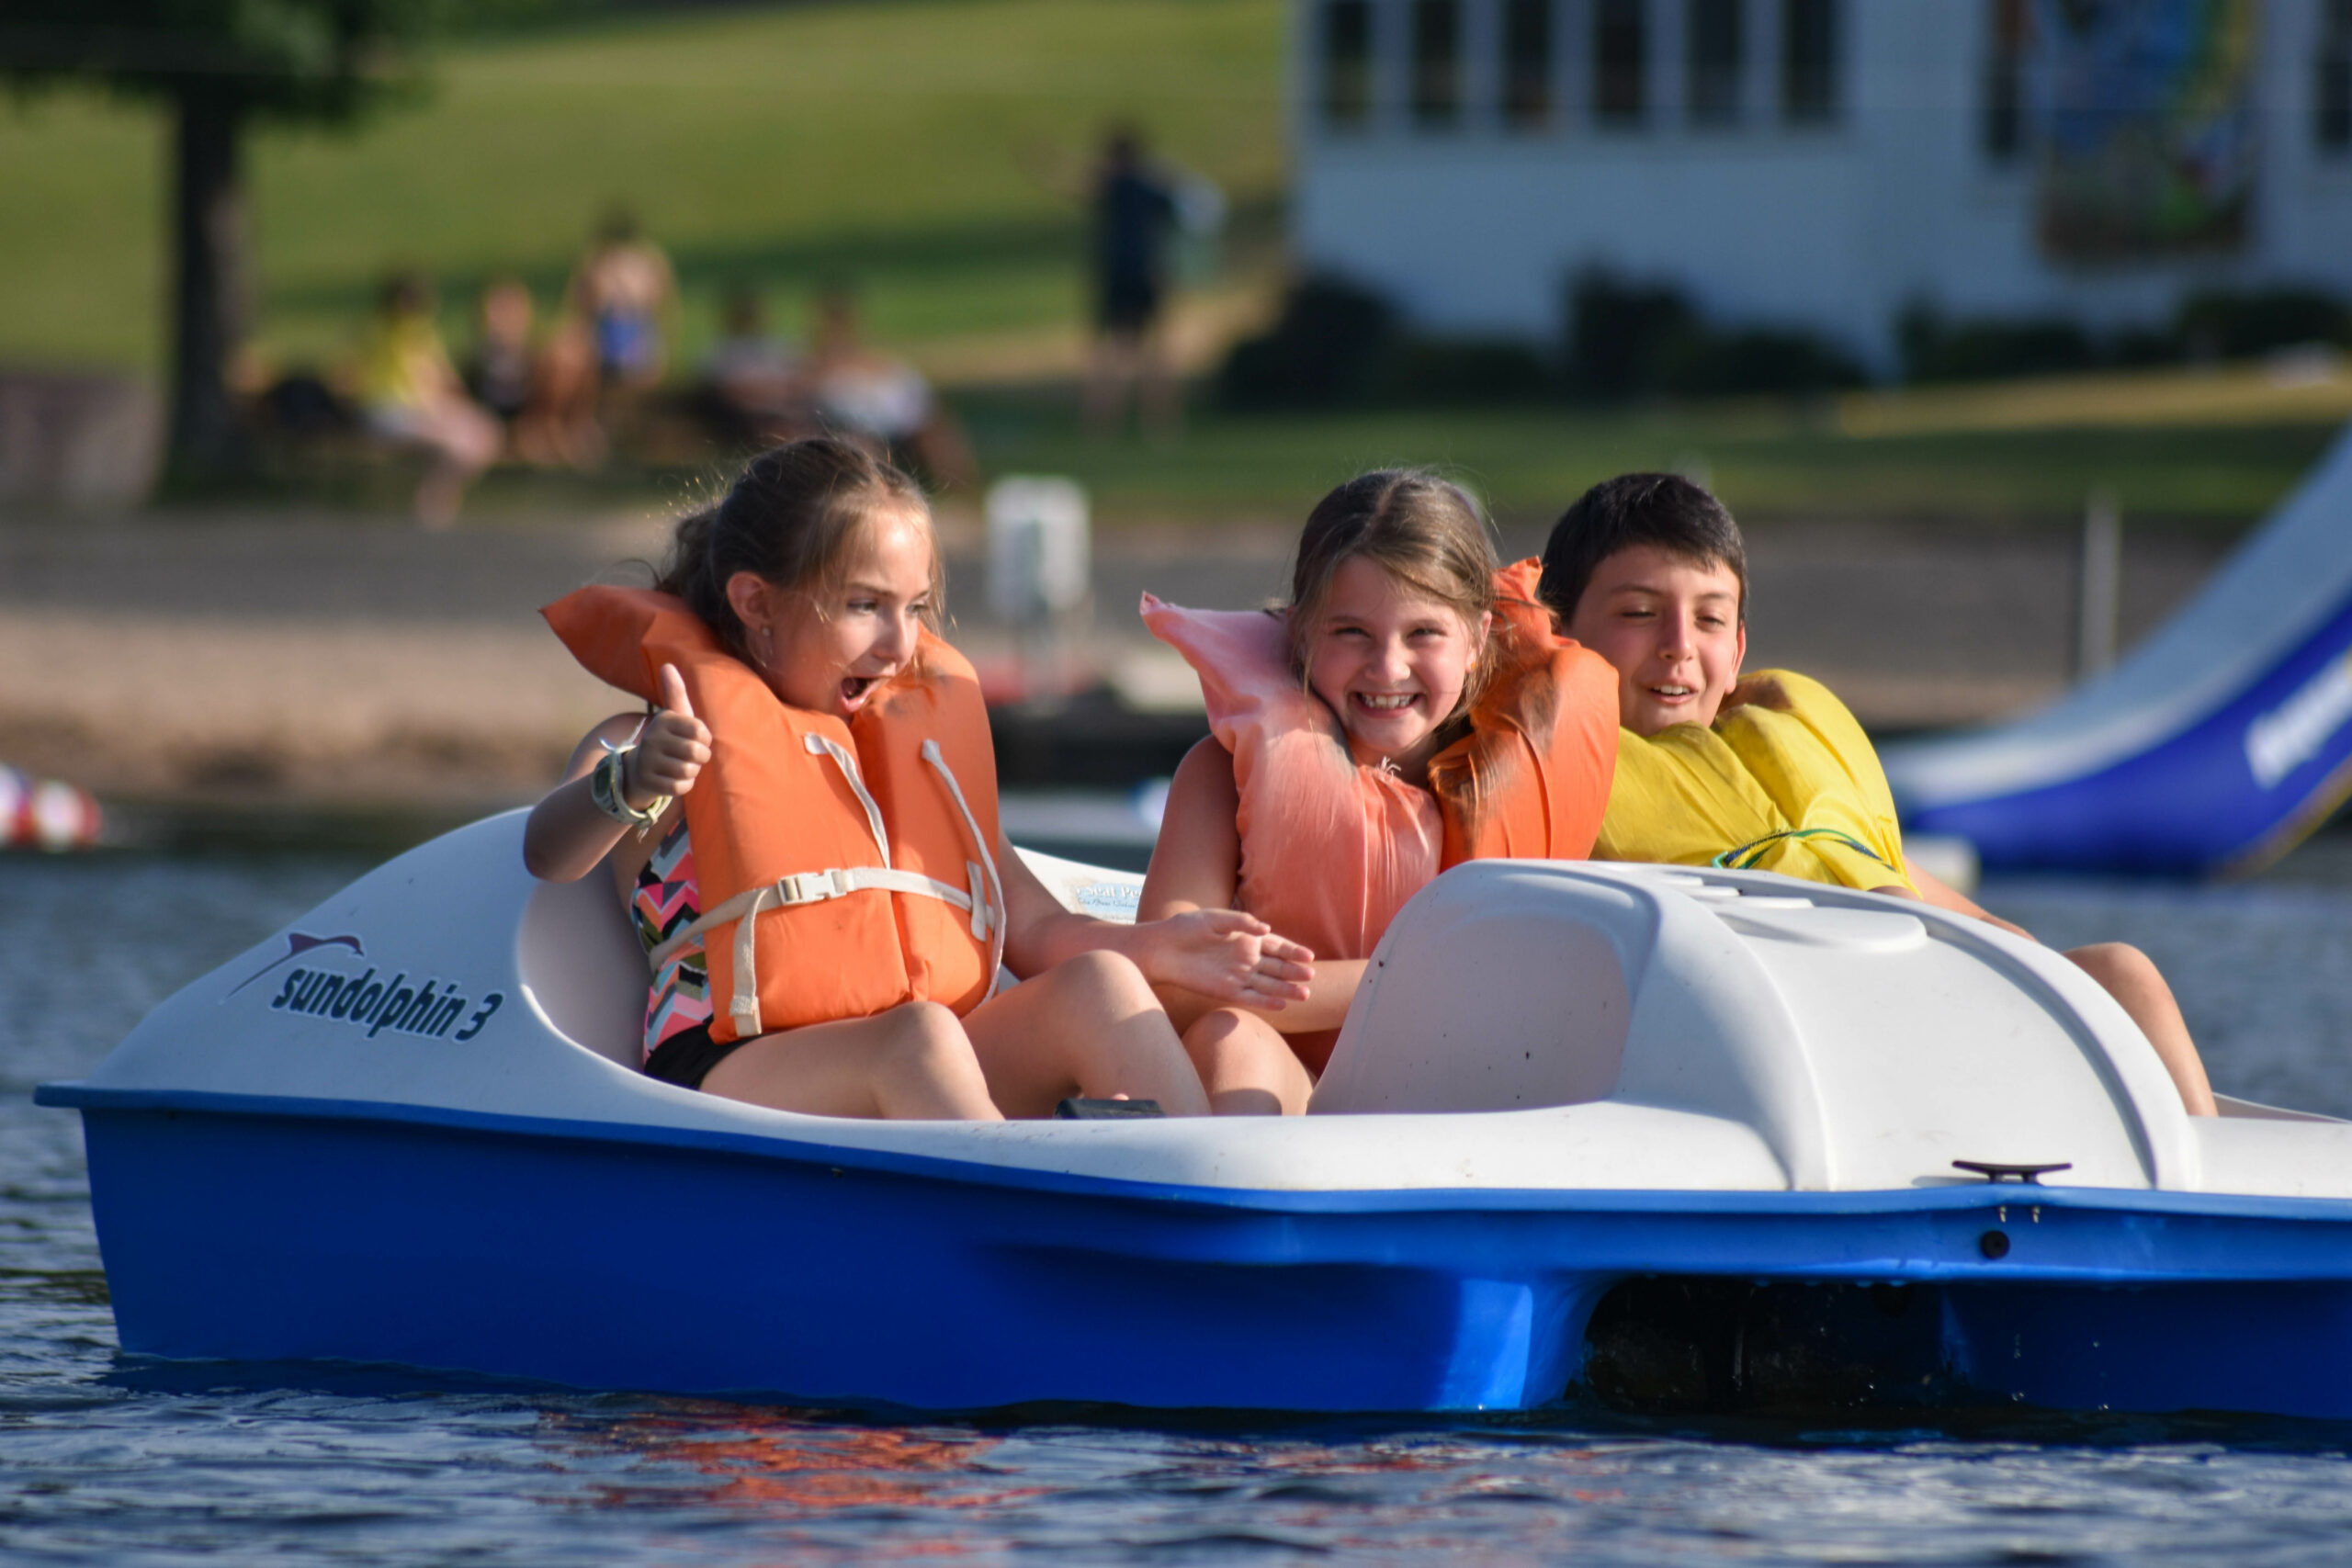 Two young girls and a boy in orange life jackets paddle a paddle boat.